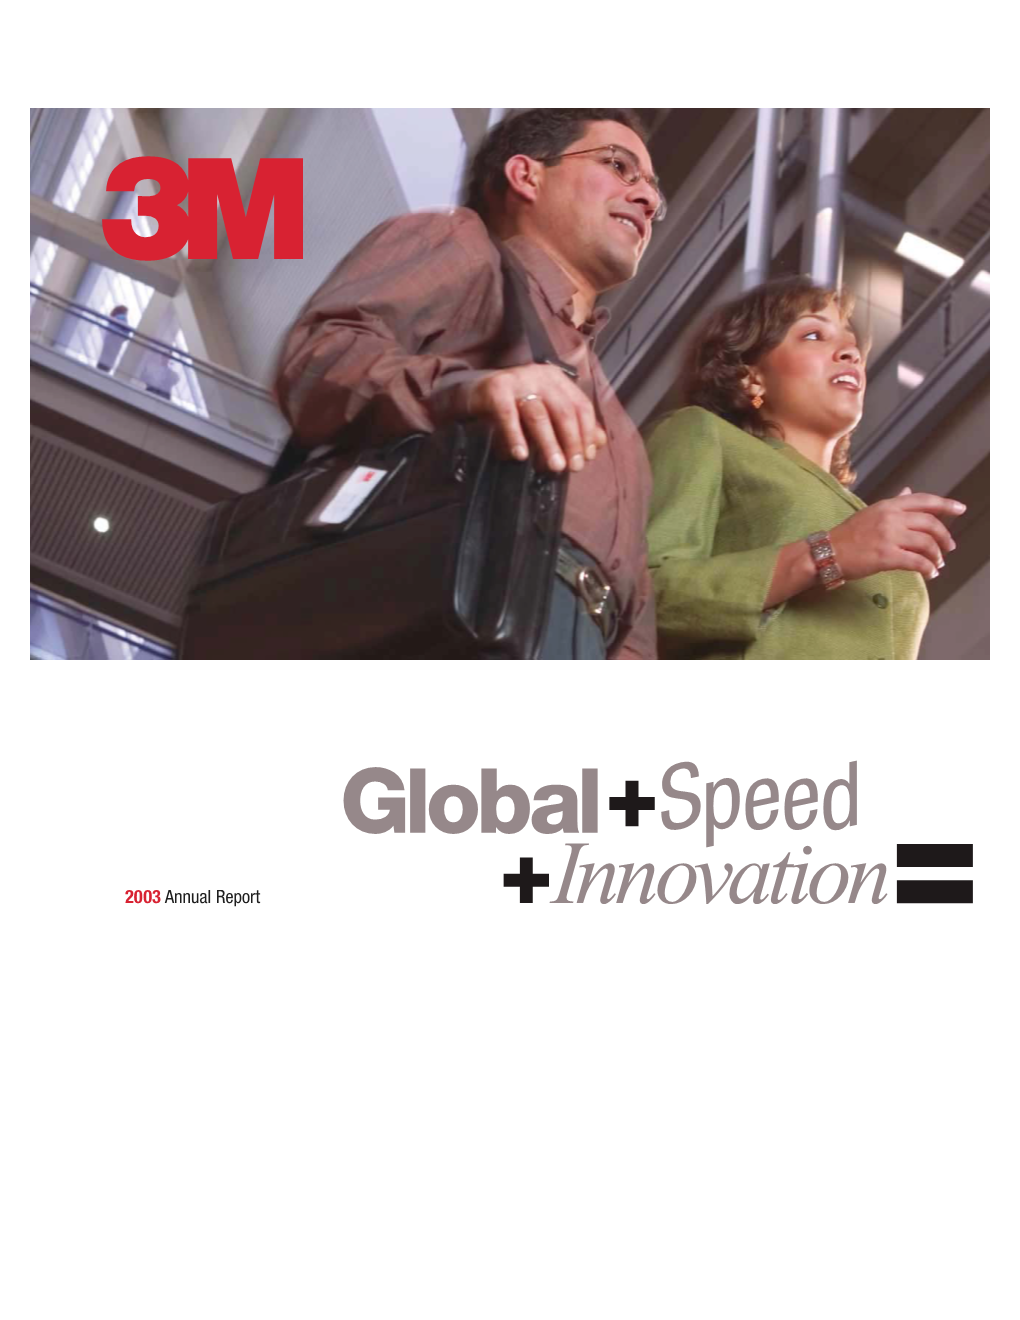 At 3M Does Best – Innovation Ship Assessment Process As Well As Our Compensation System